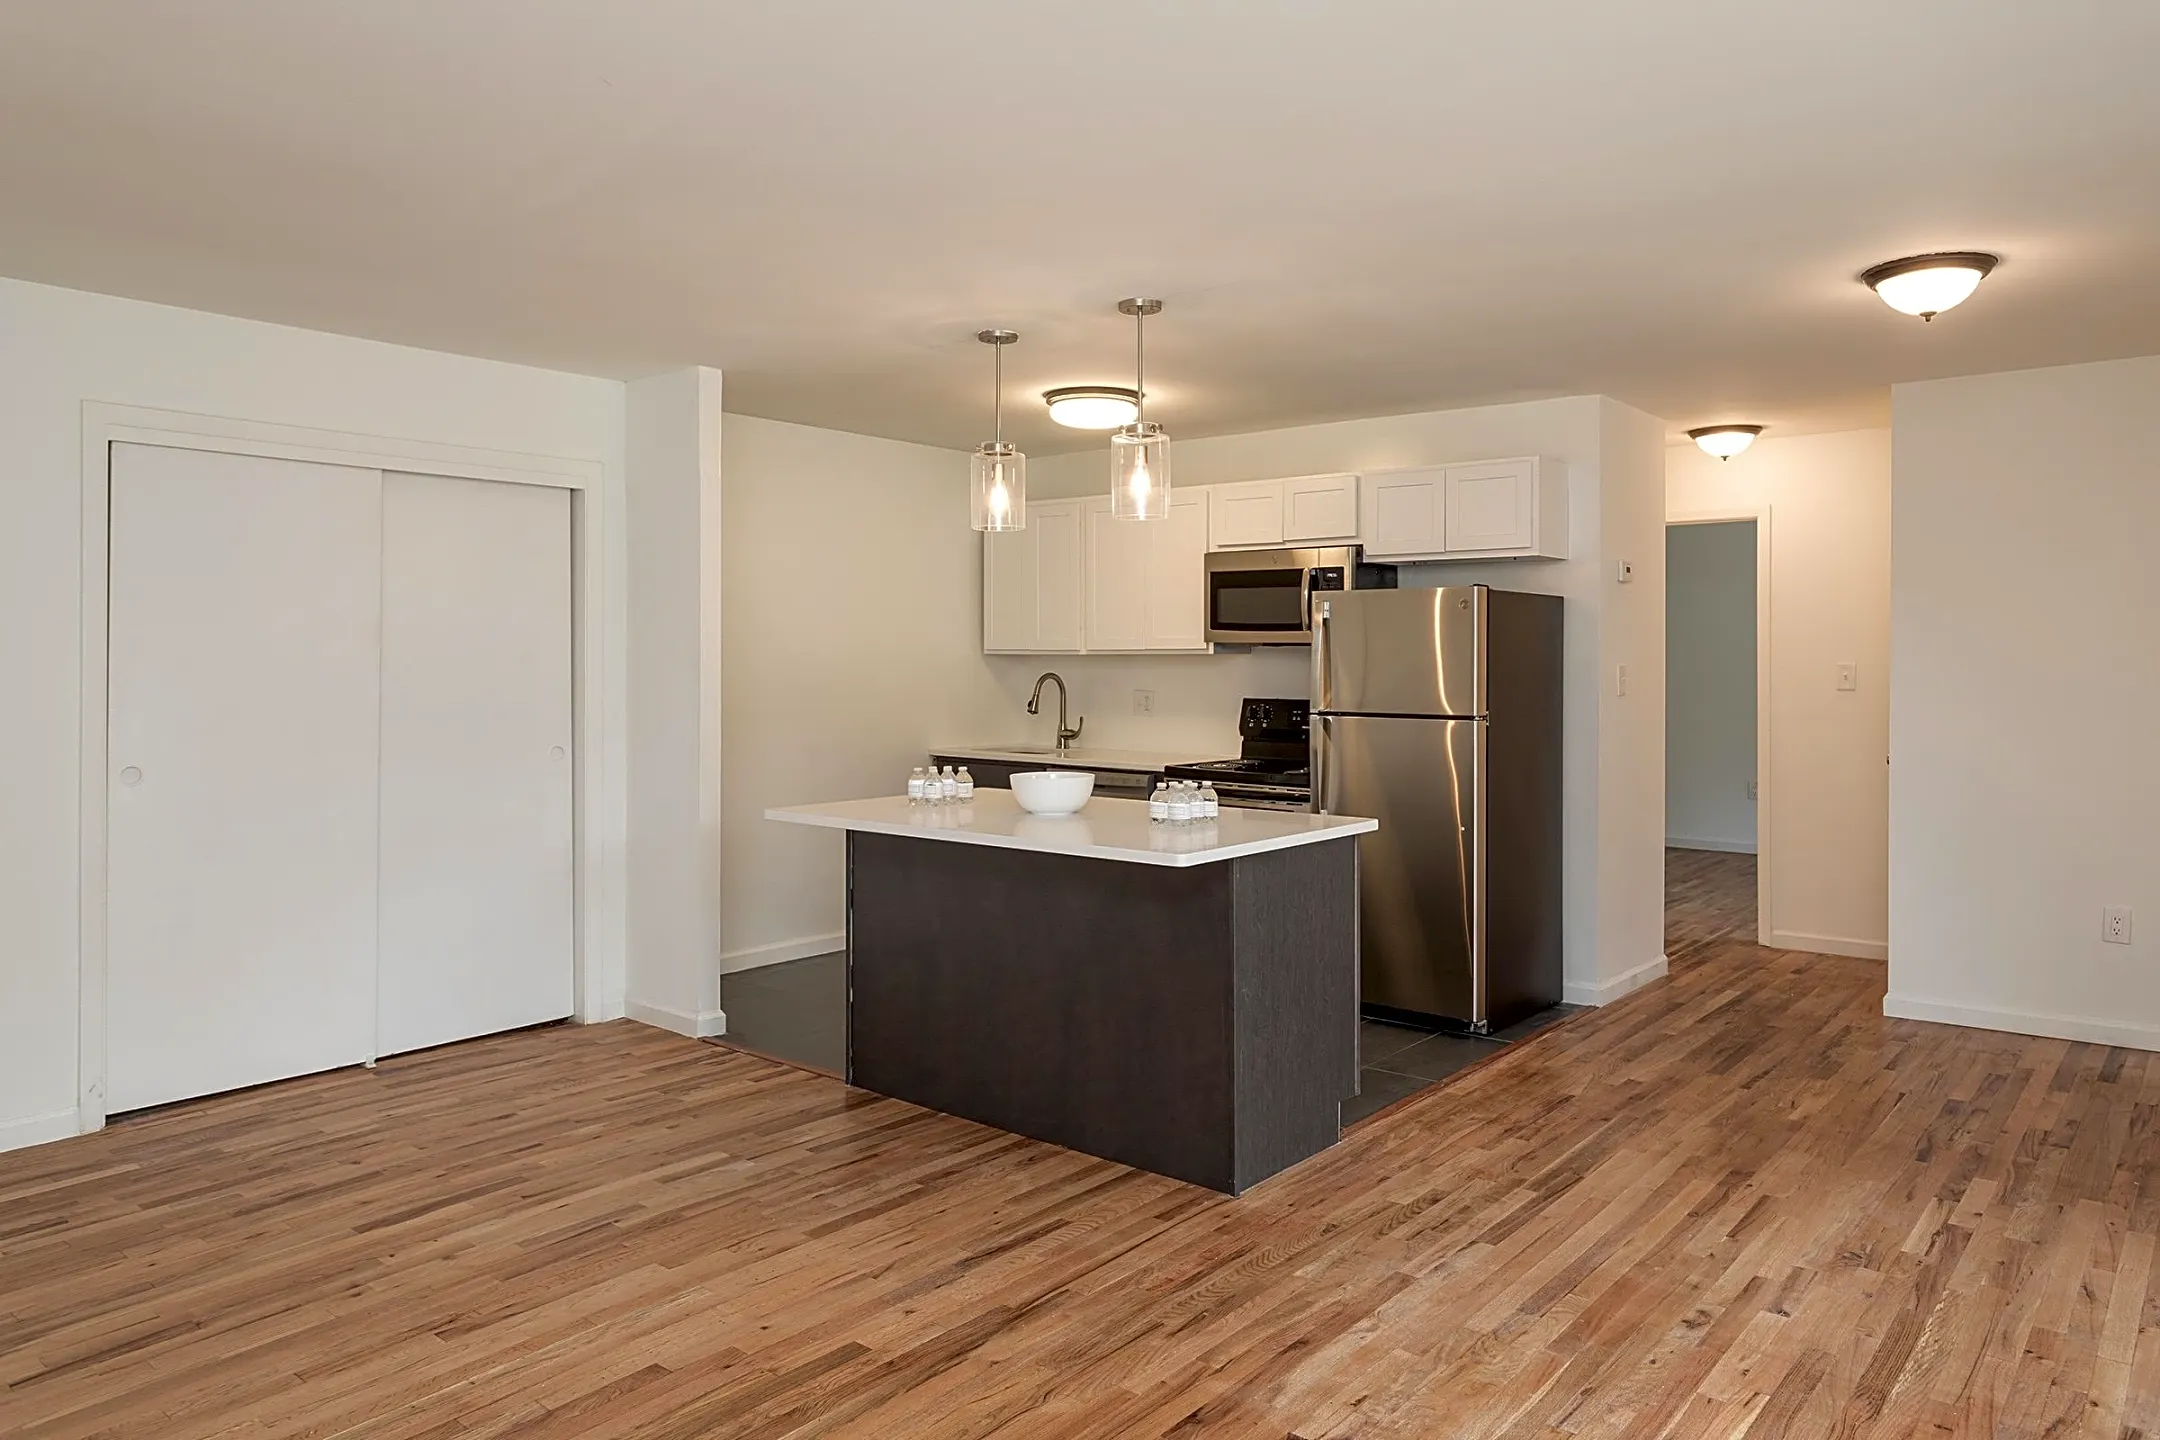 Kitchen - Perry Hall Apartments - Nottingham, MD